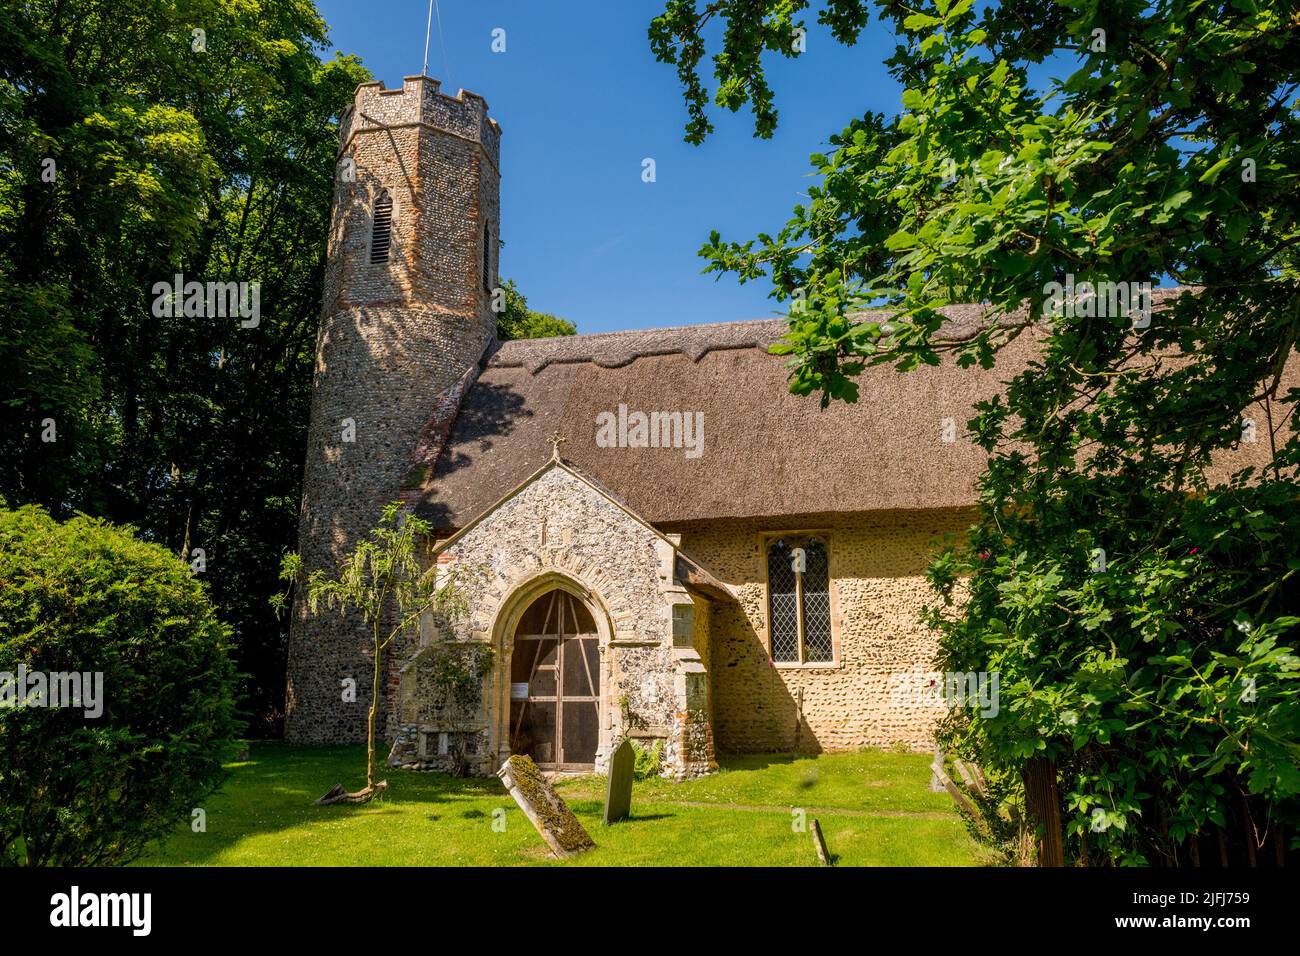 Thatched roof of All Saints church, Horsey, Norfolk, England Stock Photo